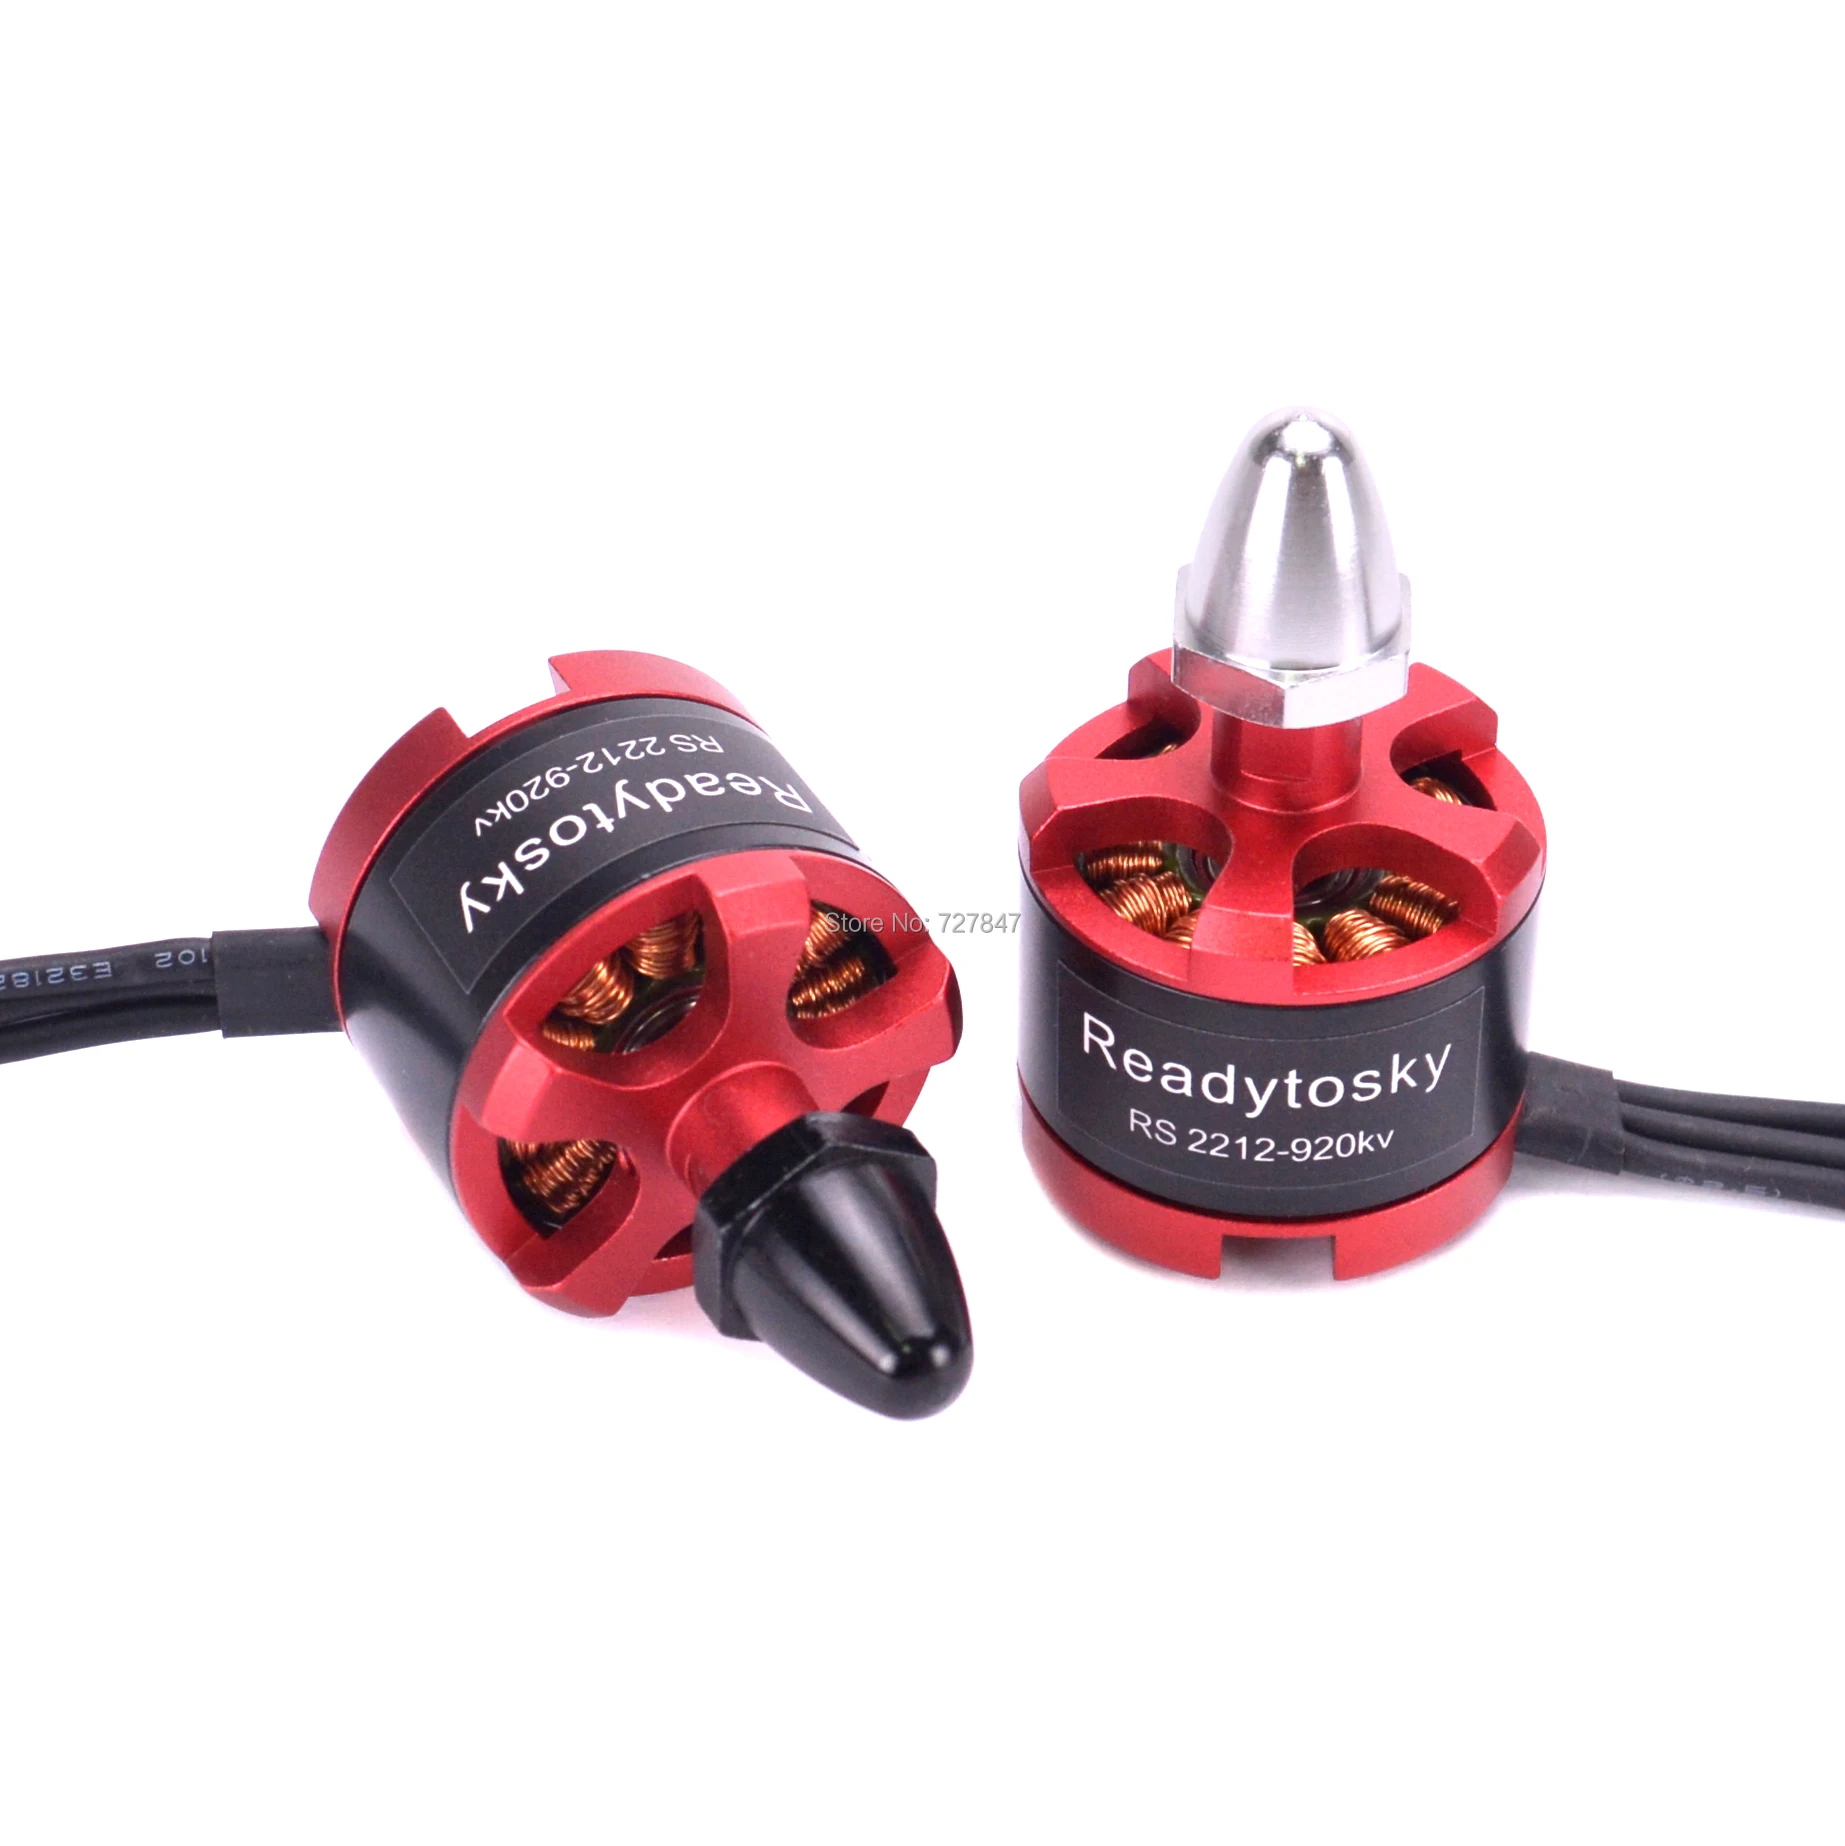 NEW 2212 920KV Brushless Motor CW CCW  for F330 X525 F450 S500 500 550 Quadcopter  Multirotor images - 6